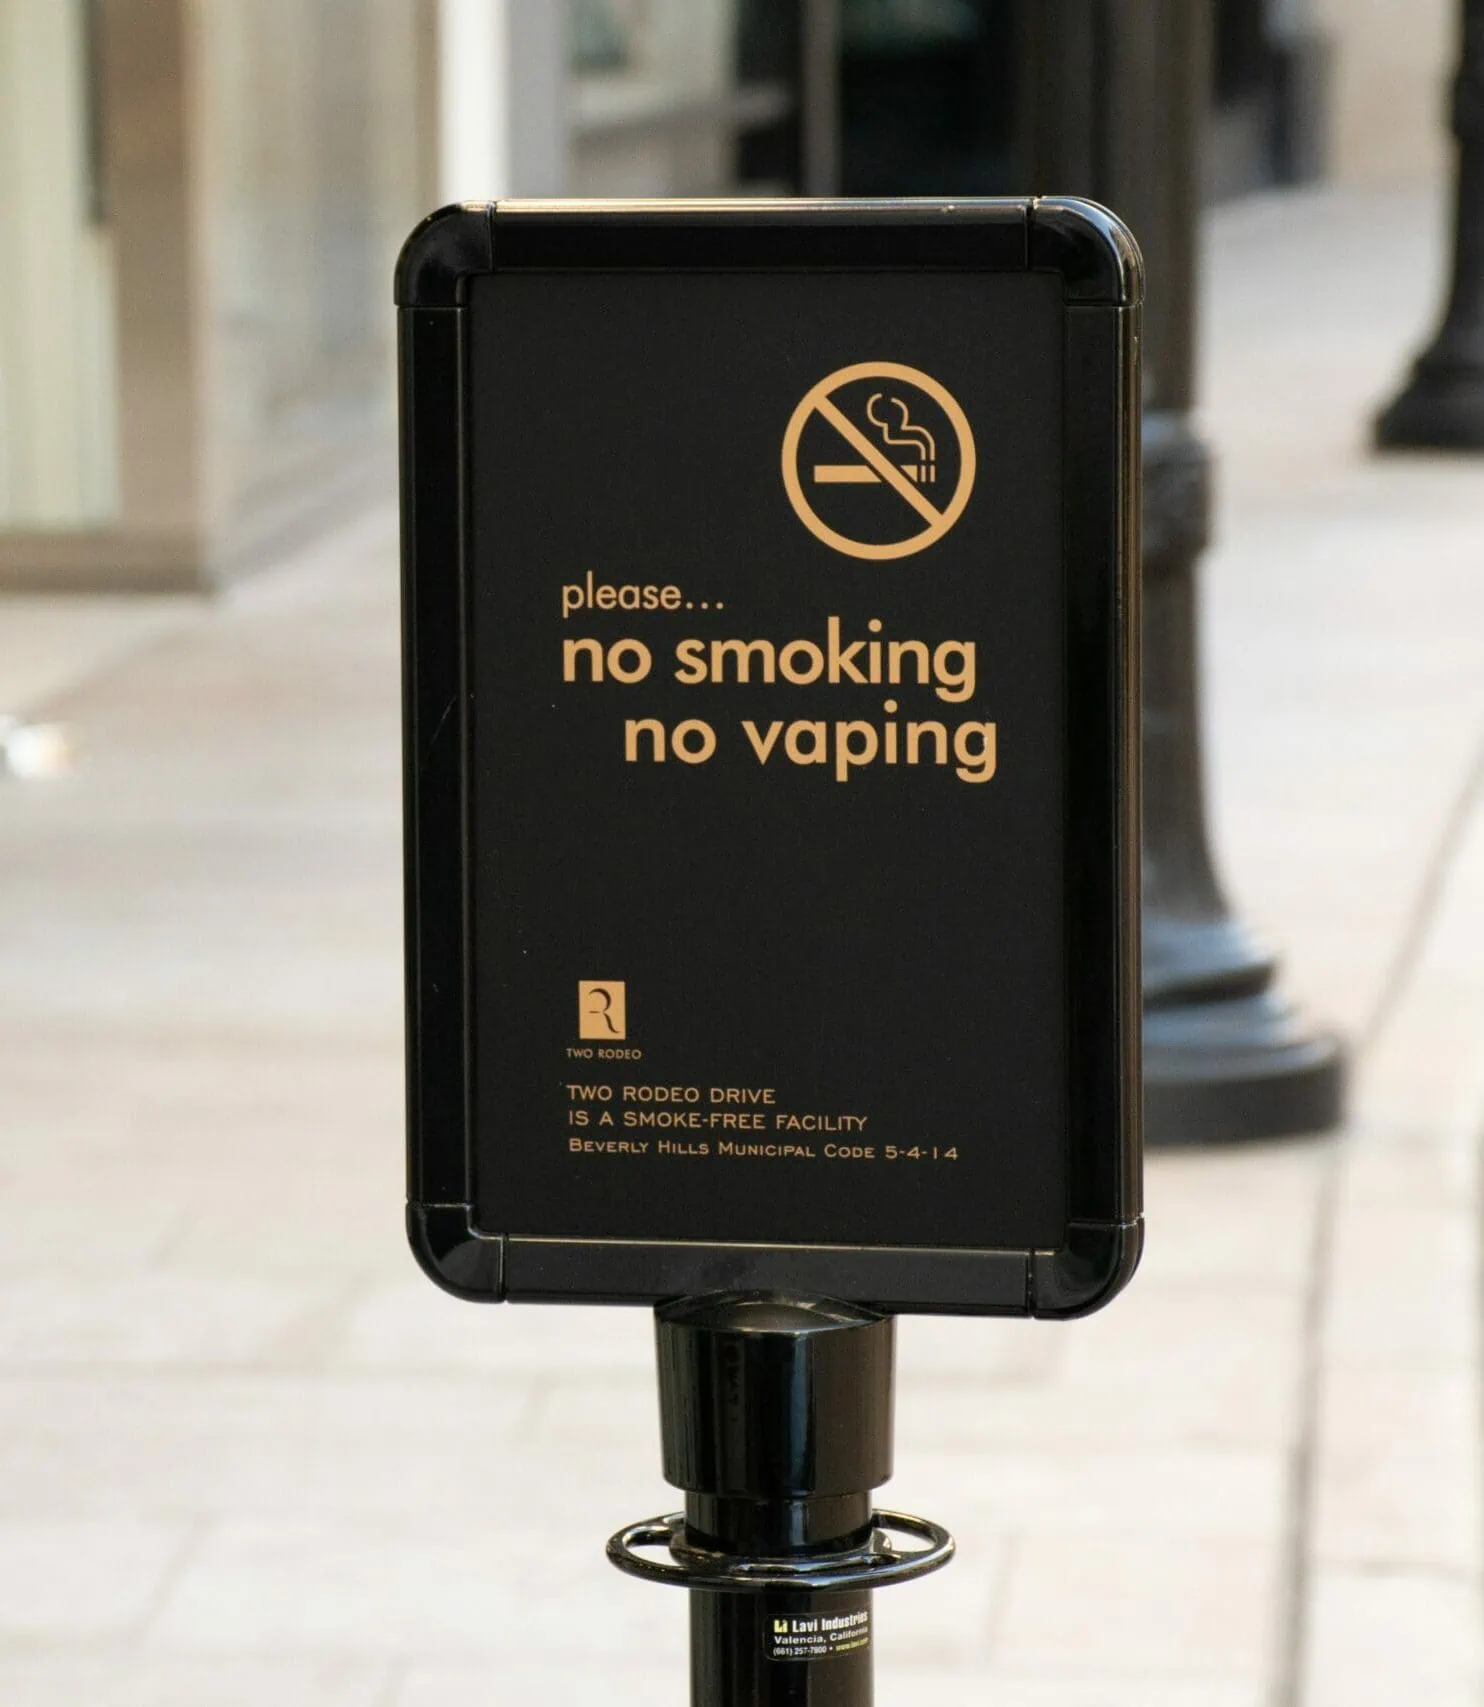 No vaping sign on business